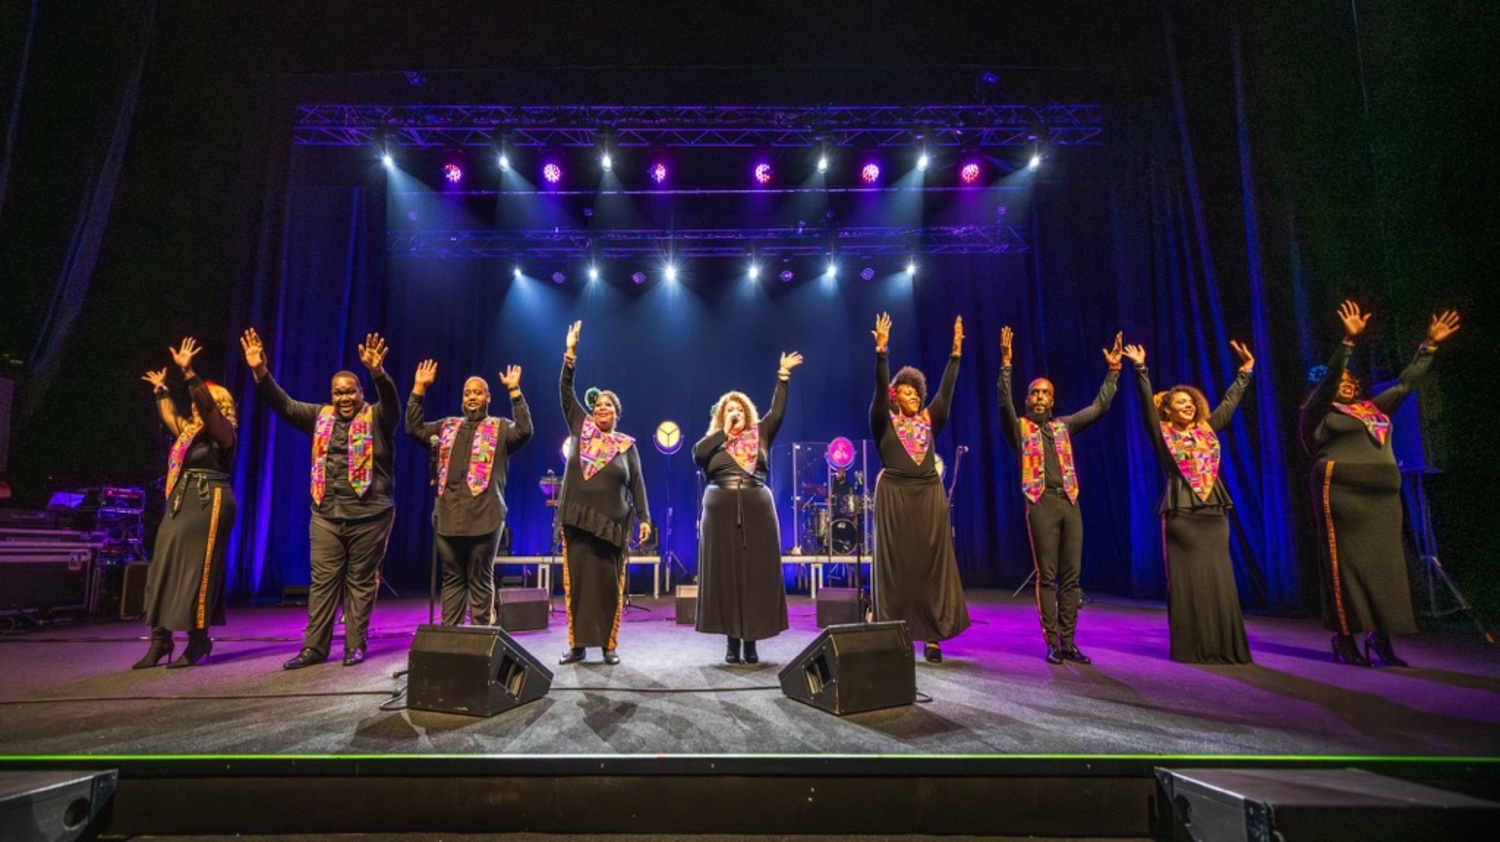 Music Mondays at Bay Street Theater presents The Harlem Gospel Choir in a tribute to Aretha Franklin on August 5. COURTESY BAY STREET THEATER